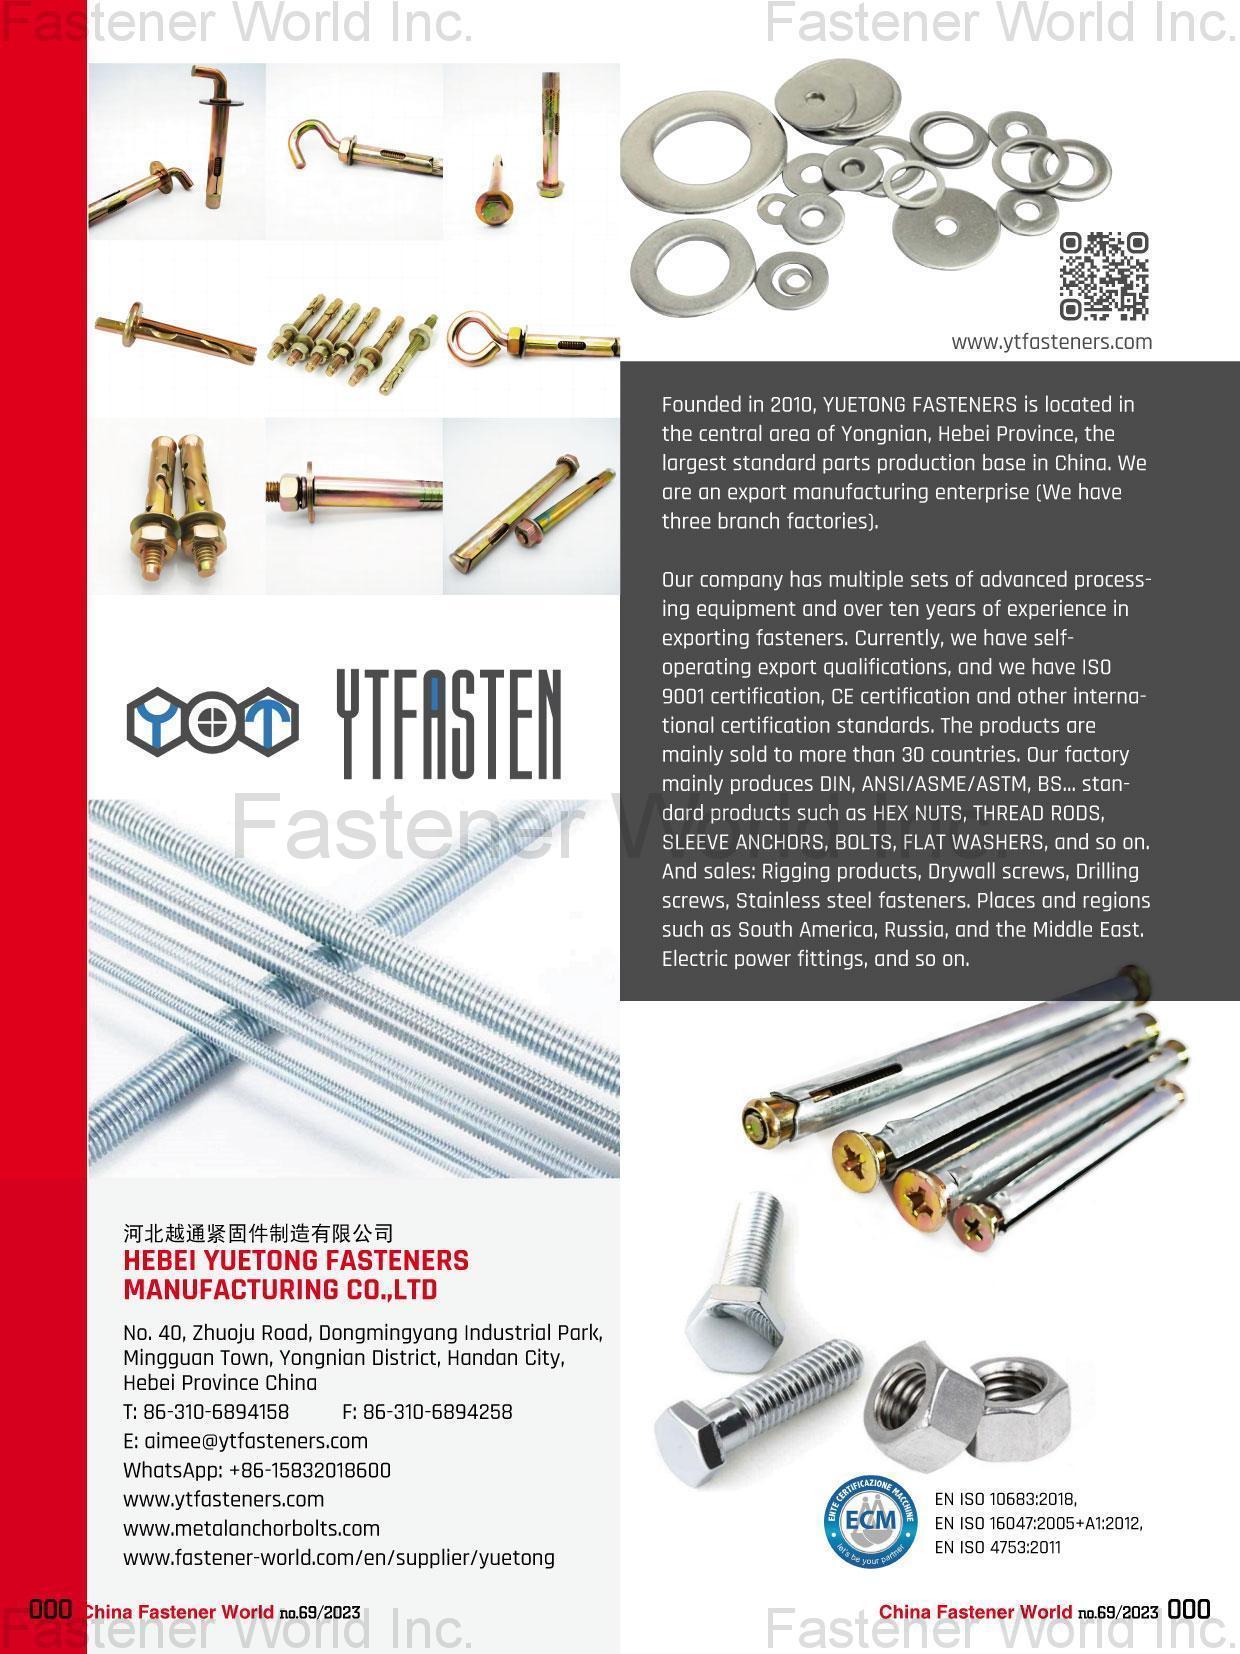 HEBEI YUETONG FASTENERS MANUFACTURING CO., LTD. (YTFASTEN)) , Thread Rod, Sleeve Anchor, Bolt, Nut, Flat Washer, Drop in Anchor, Spring Washer, H-D-G Hot Dip Galvanized, Rigging, Screws, Steel Use Stainless, Electric Power Fittings